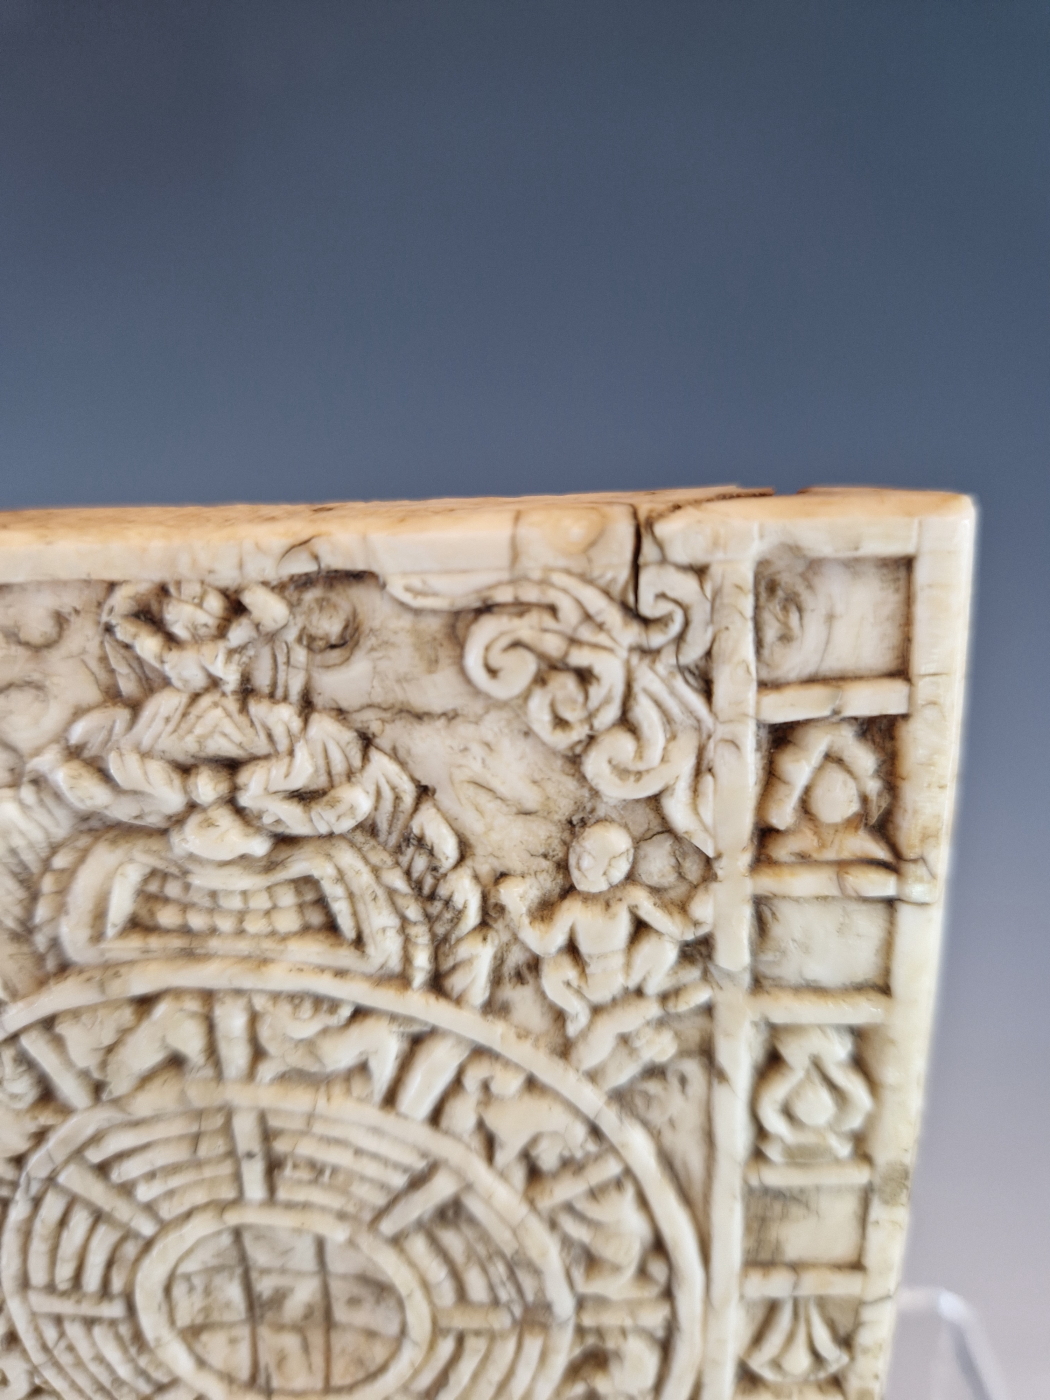 A TIBETAN ELEPHANT TOOTH PANEL CARVED WITH AN ASTROLOGICAL CALENDAR OR KALACHAKRA, THE WHEEL - Image 2 of 6